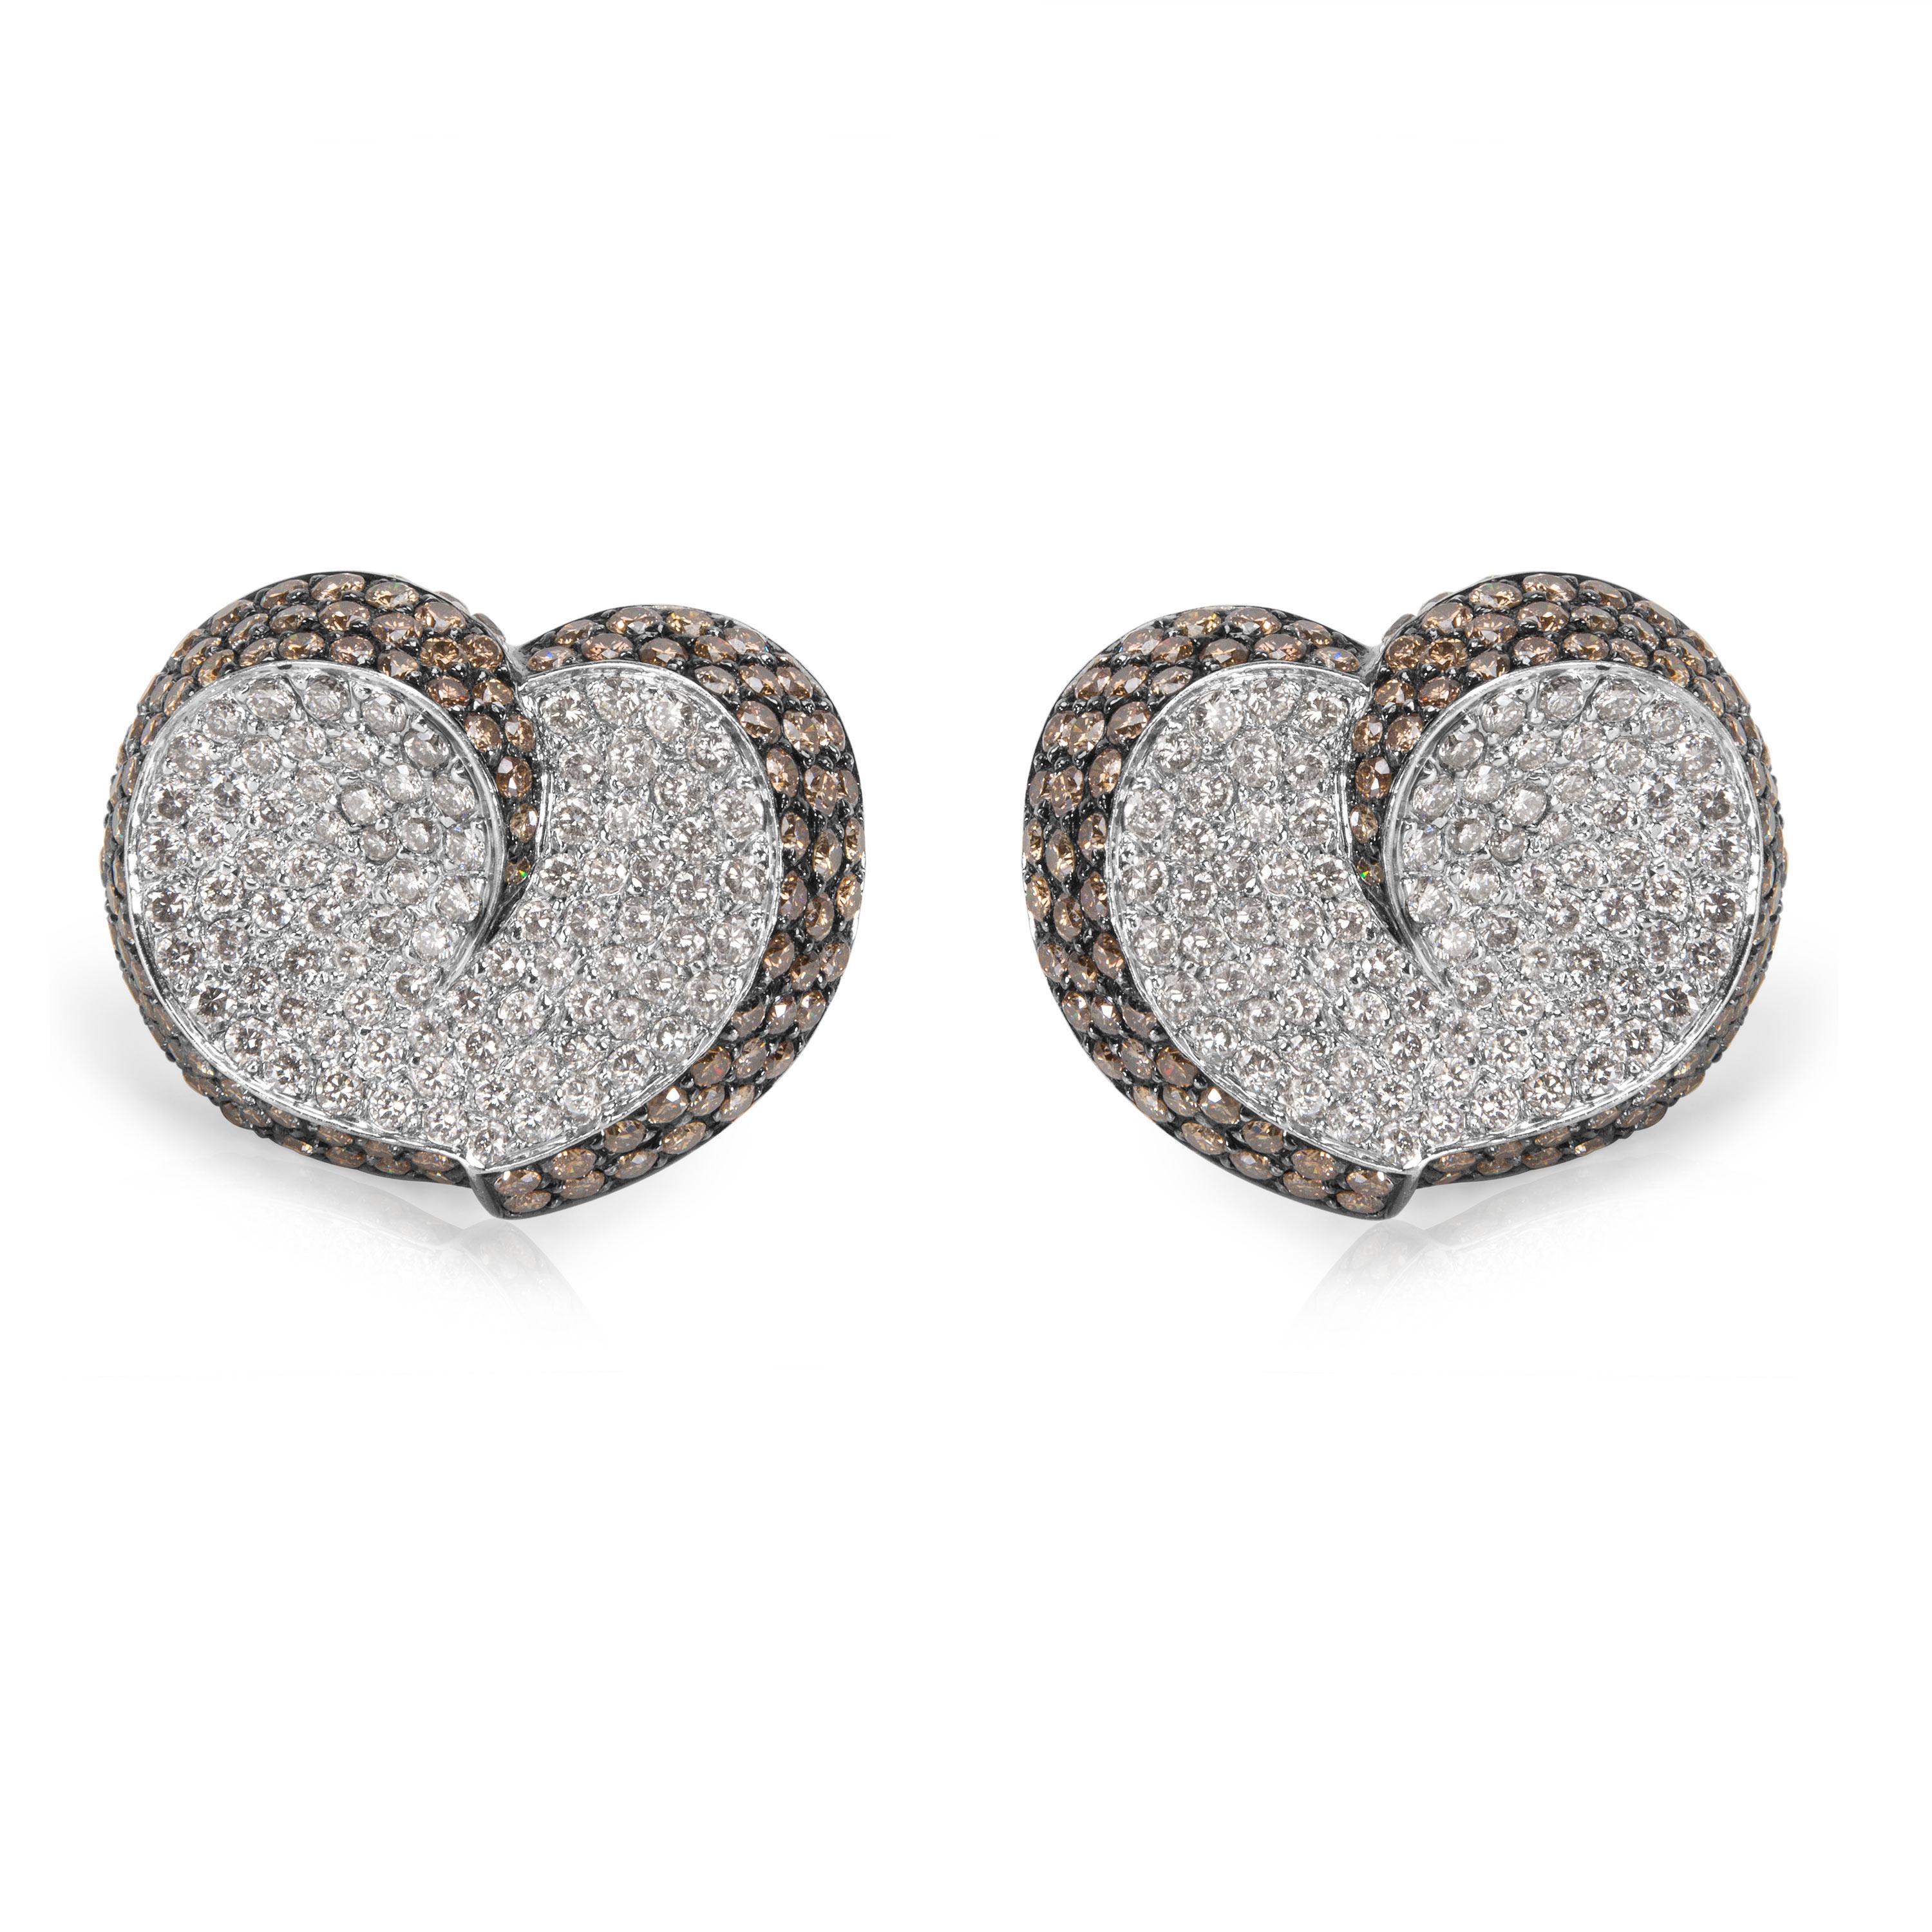 Brown & White Diamond Heart Earrings in 18KT White Gold 7.00 ctw

PRIMARY DETAILS
SKU: 033110
Listing Title: Brown & White Diamond Heart Earrings in 18KT White Gold 7.00 ctw
Condition Description: Brand New & Unworn. Free US (Contiguous) Shipping.